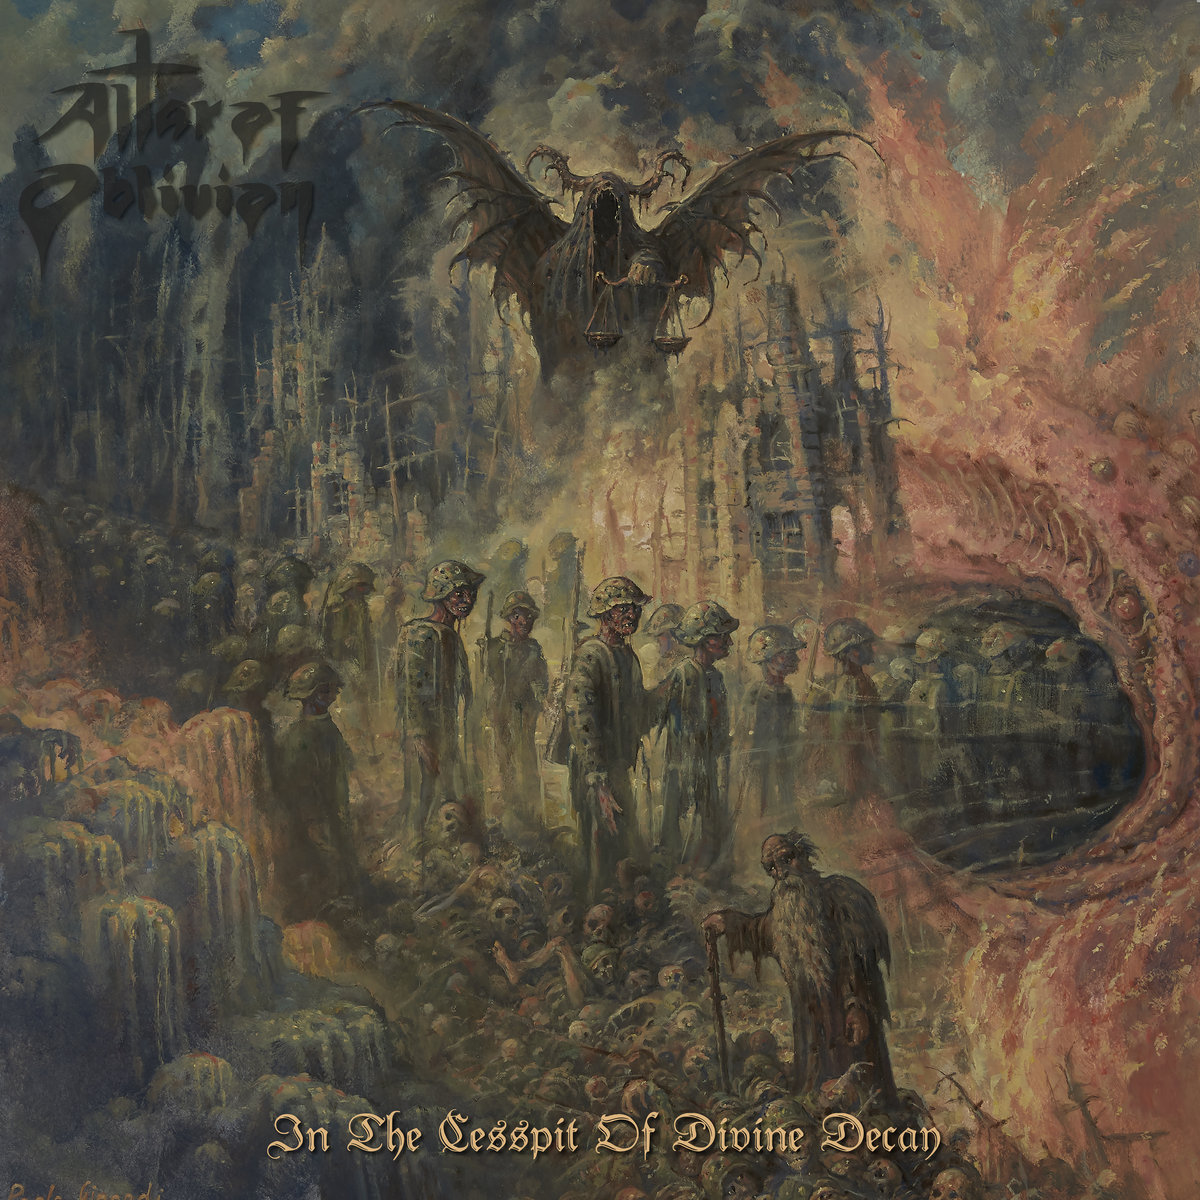 Altar Of Oblivion - The Cesspit Of Divine Decay